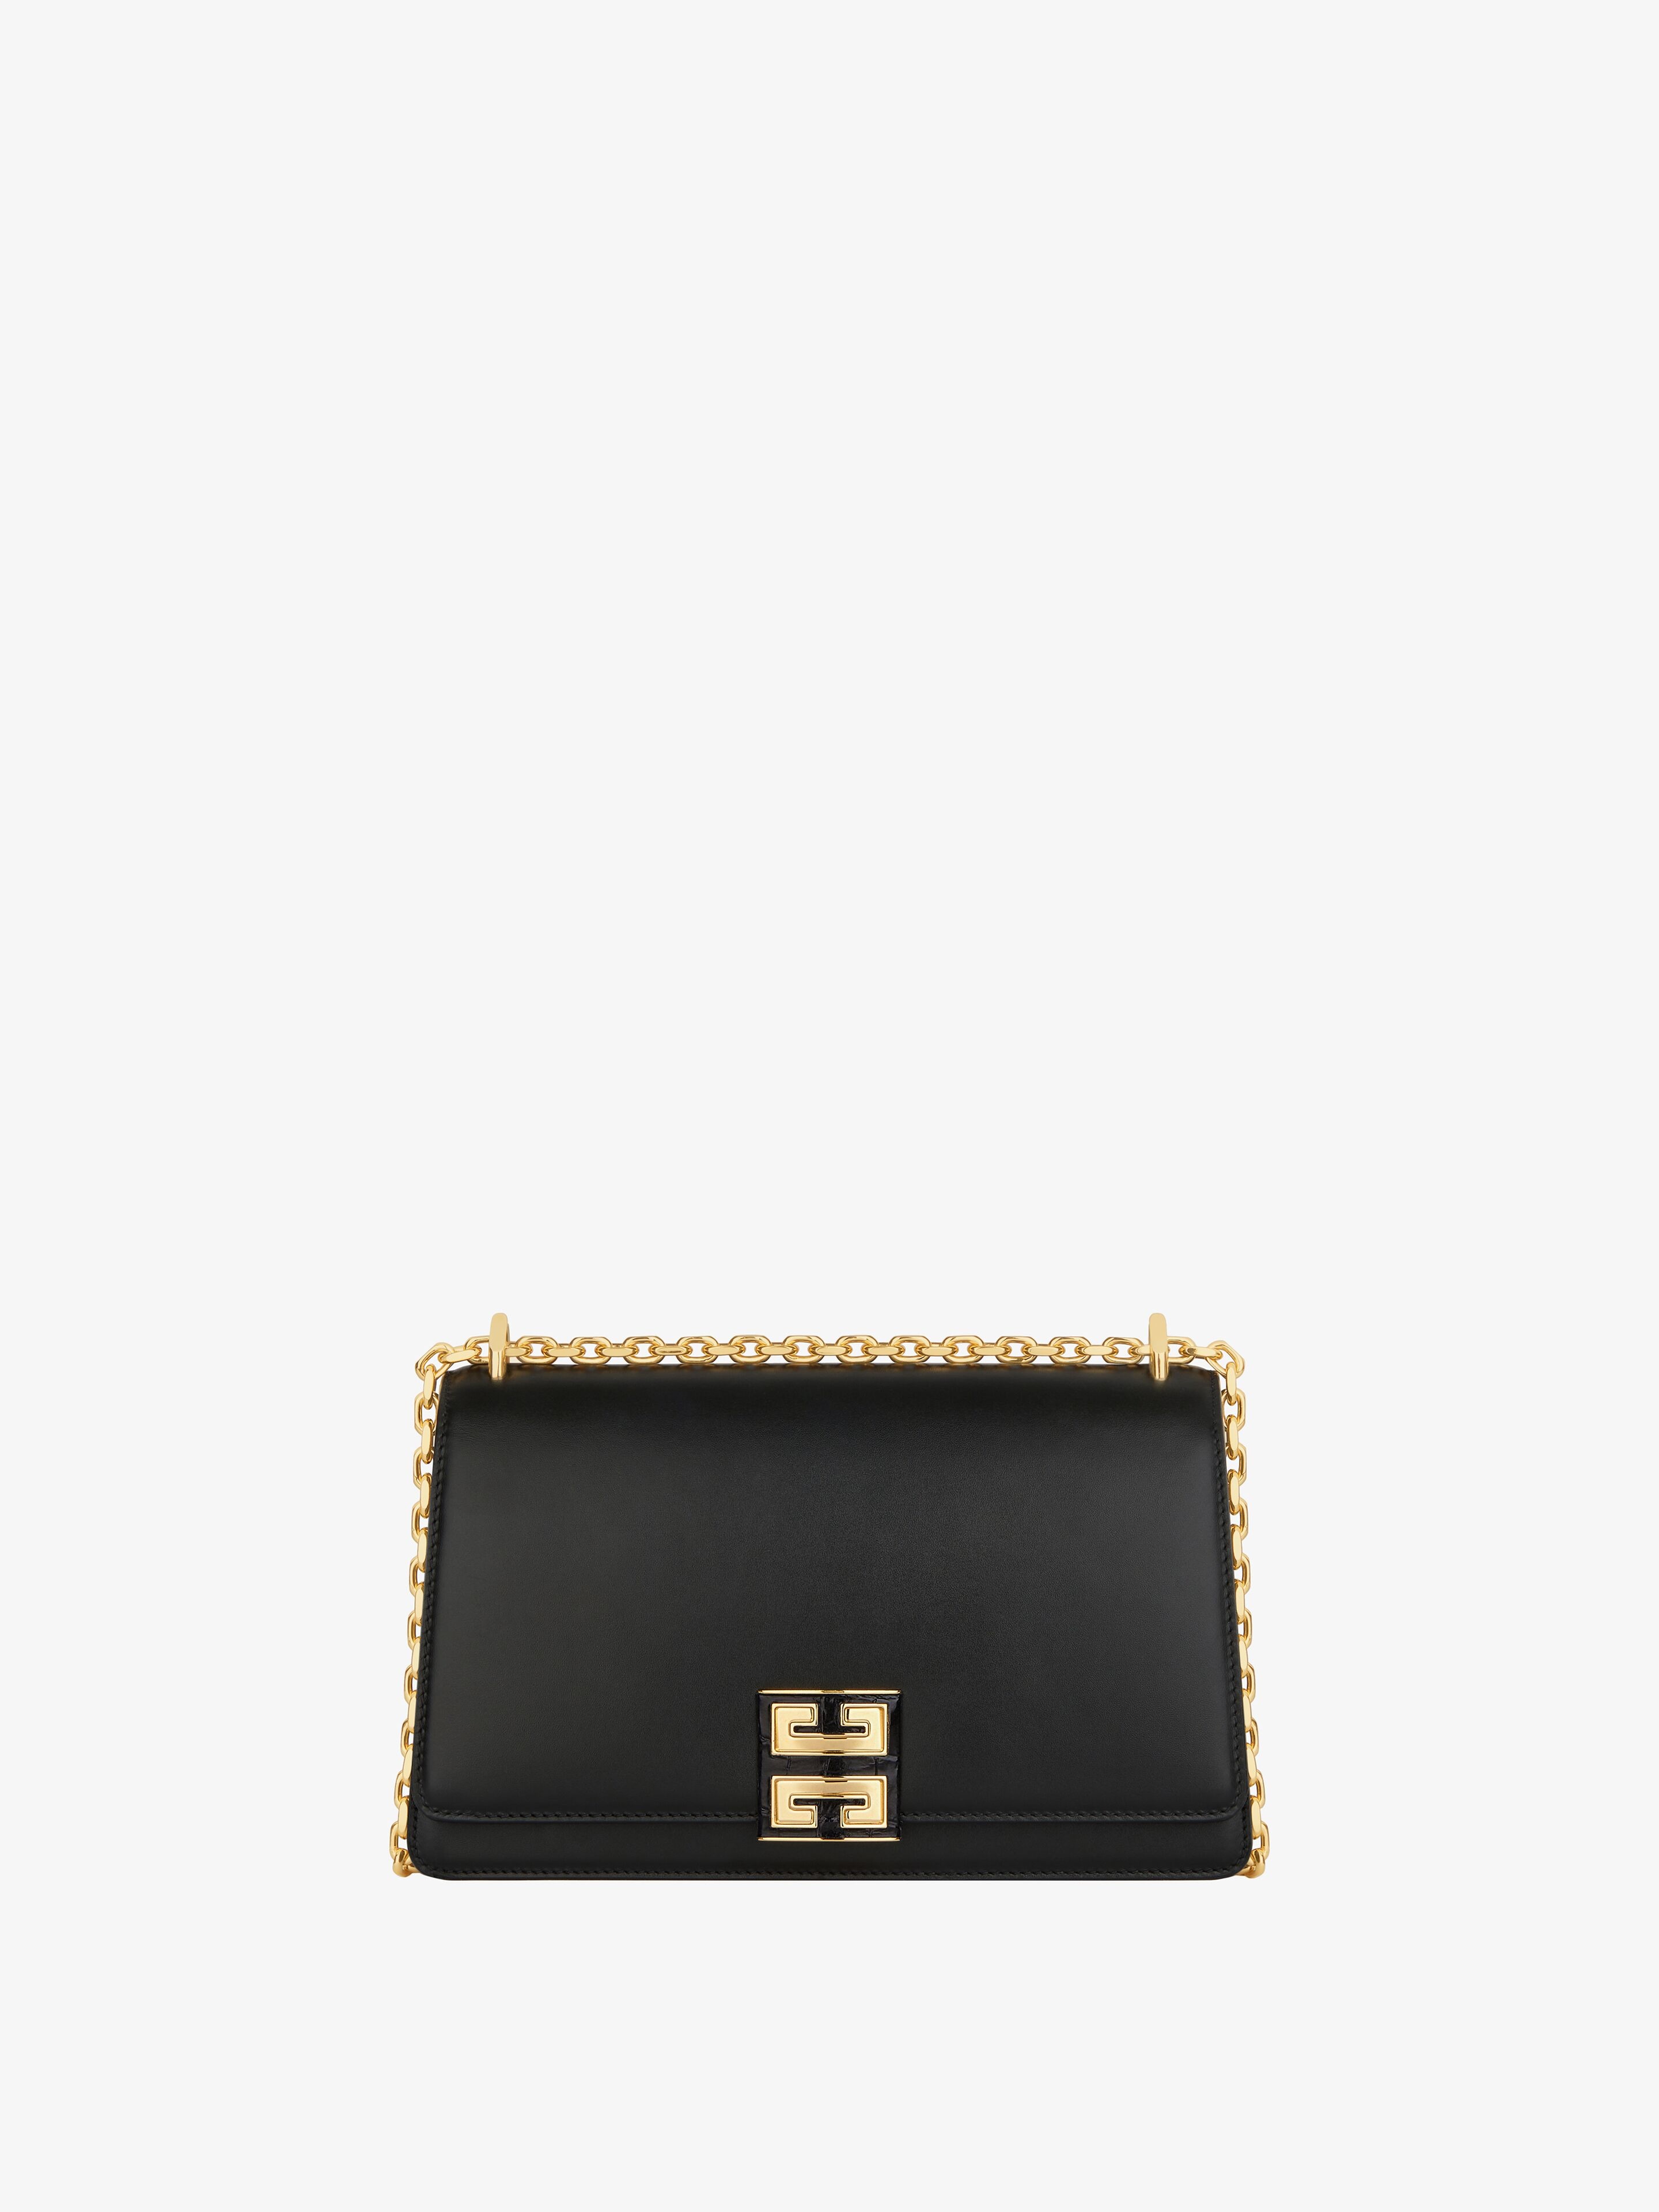 Givenchy Medium 4g Bag In Leather With Chain In Multicolor